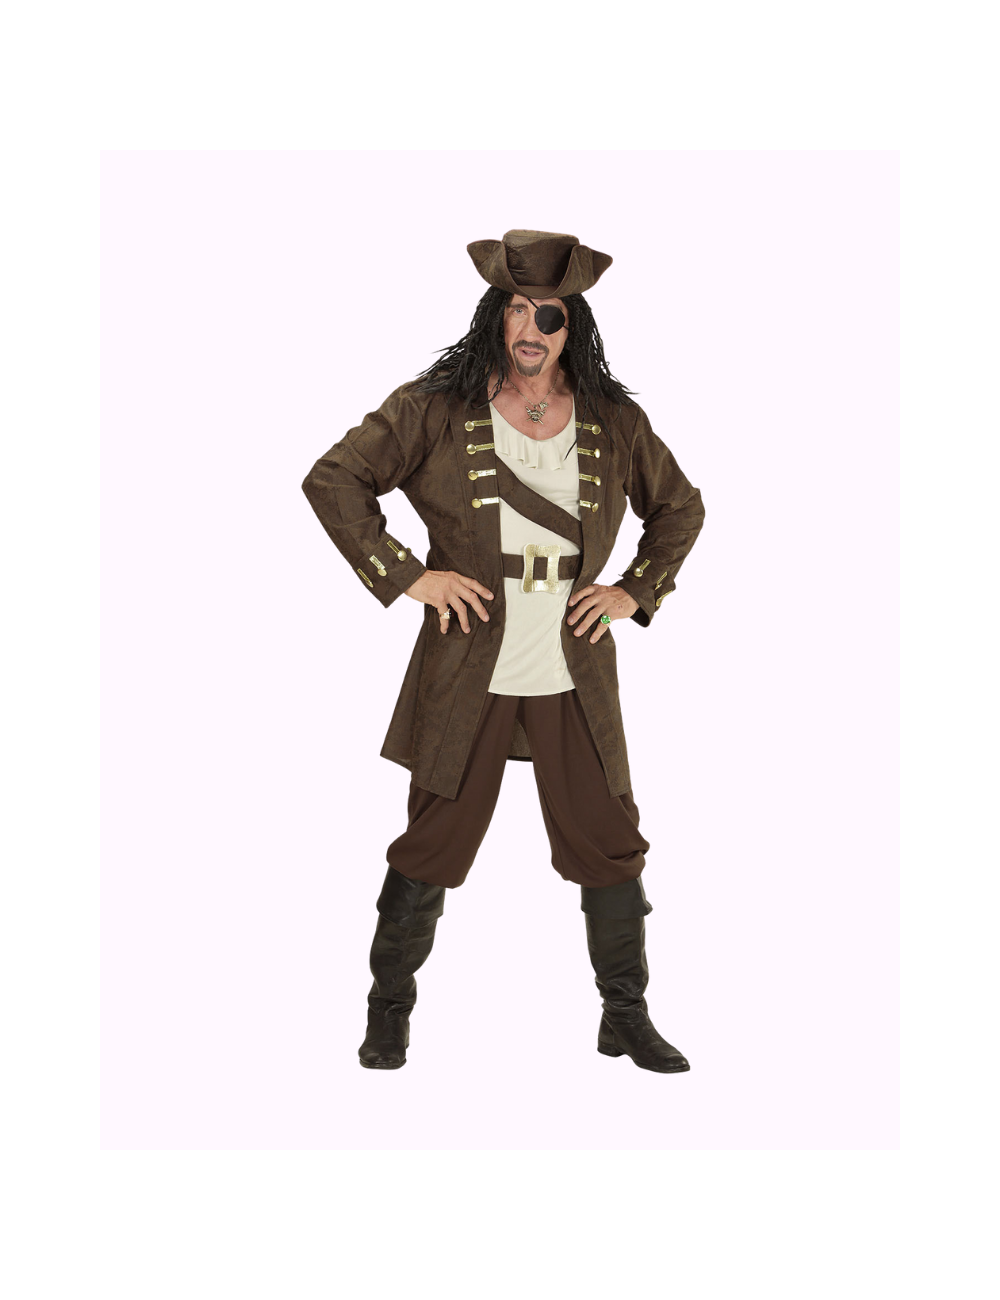 Adult disguise Captain Pirate